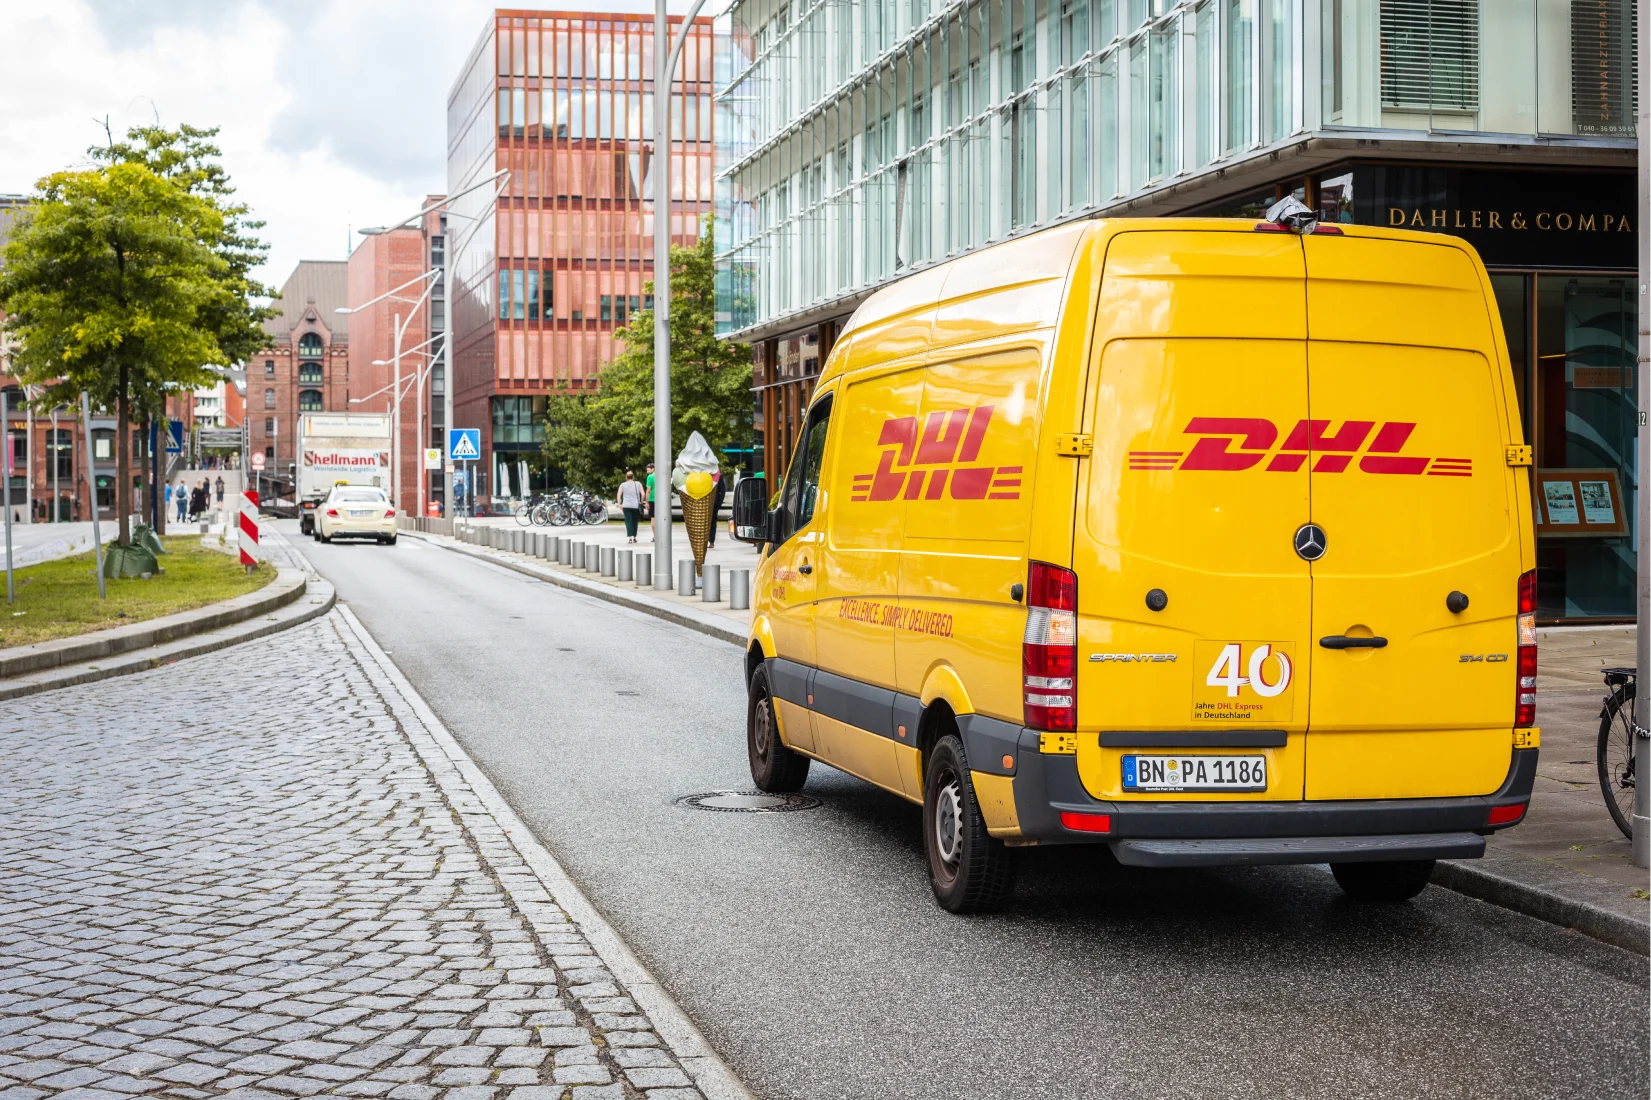 DHL delivery van parked in street